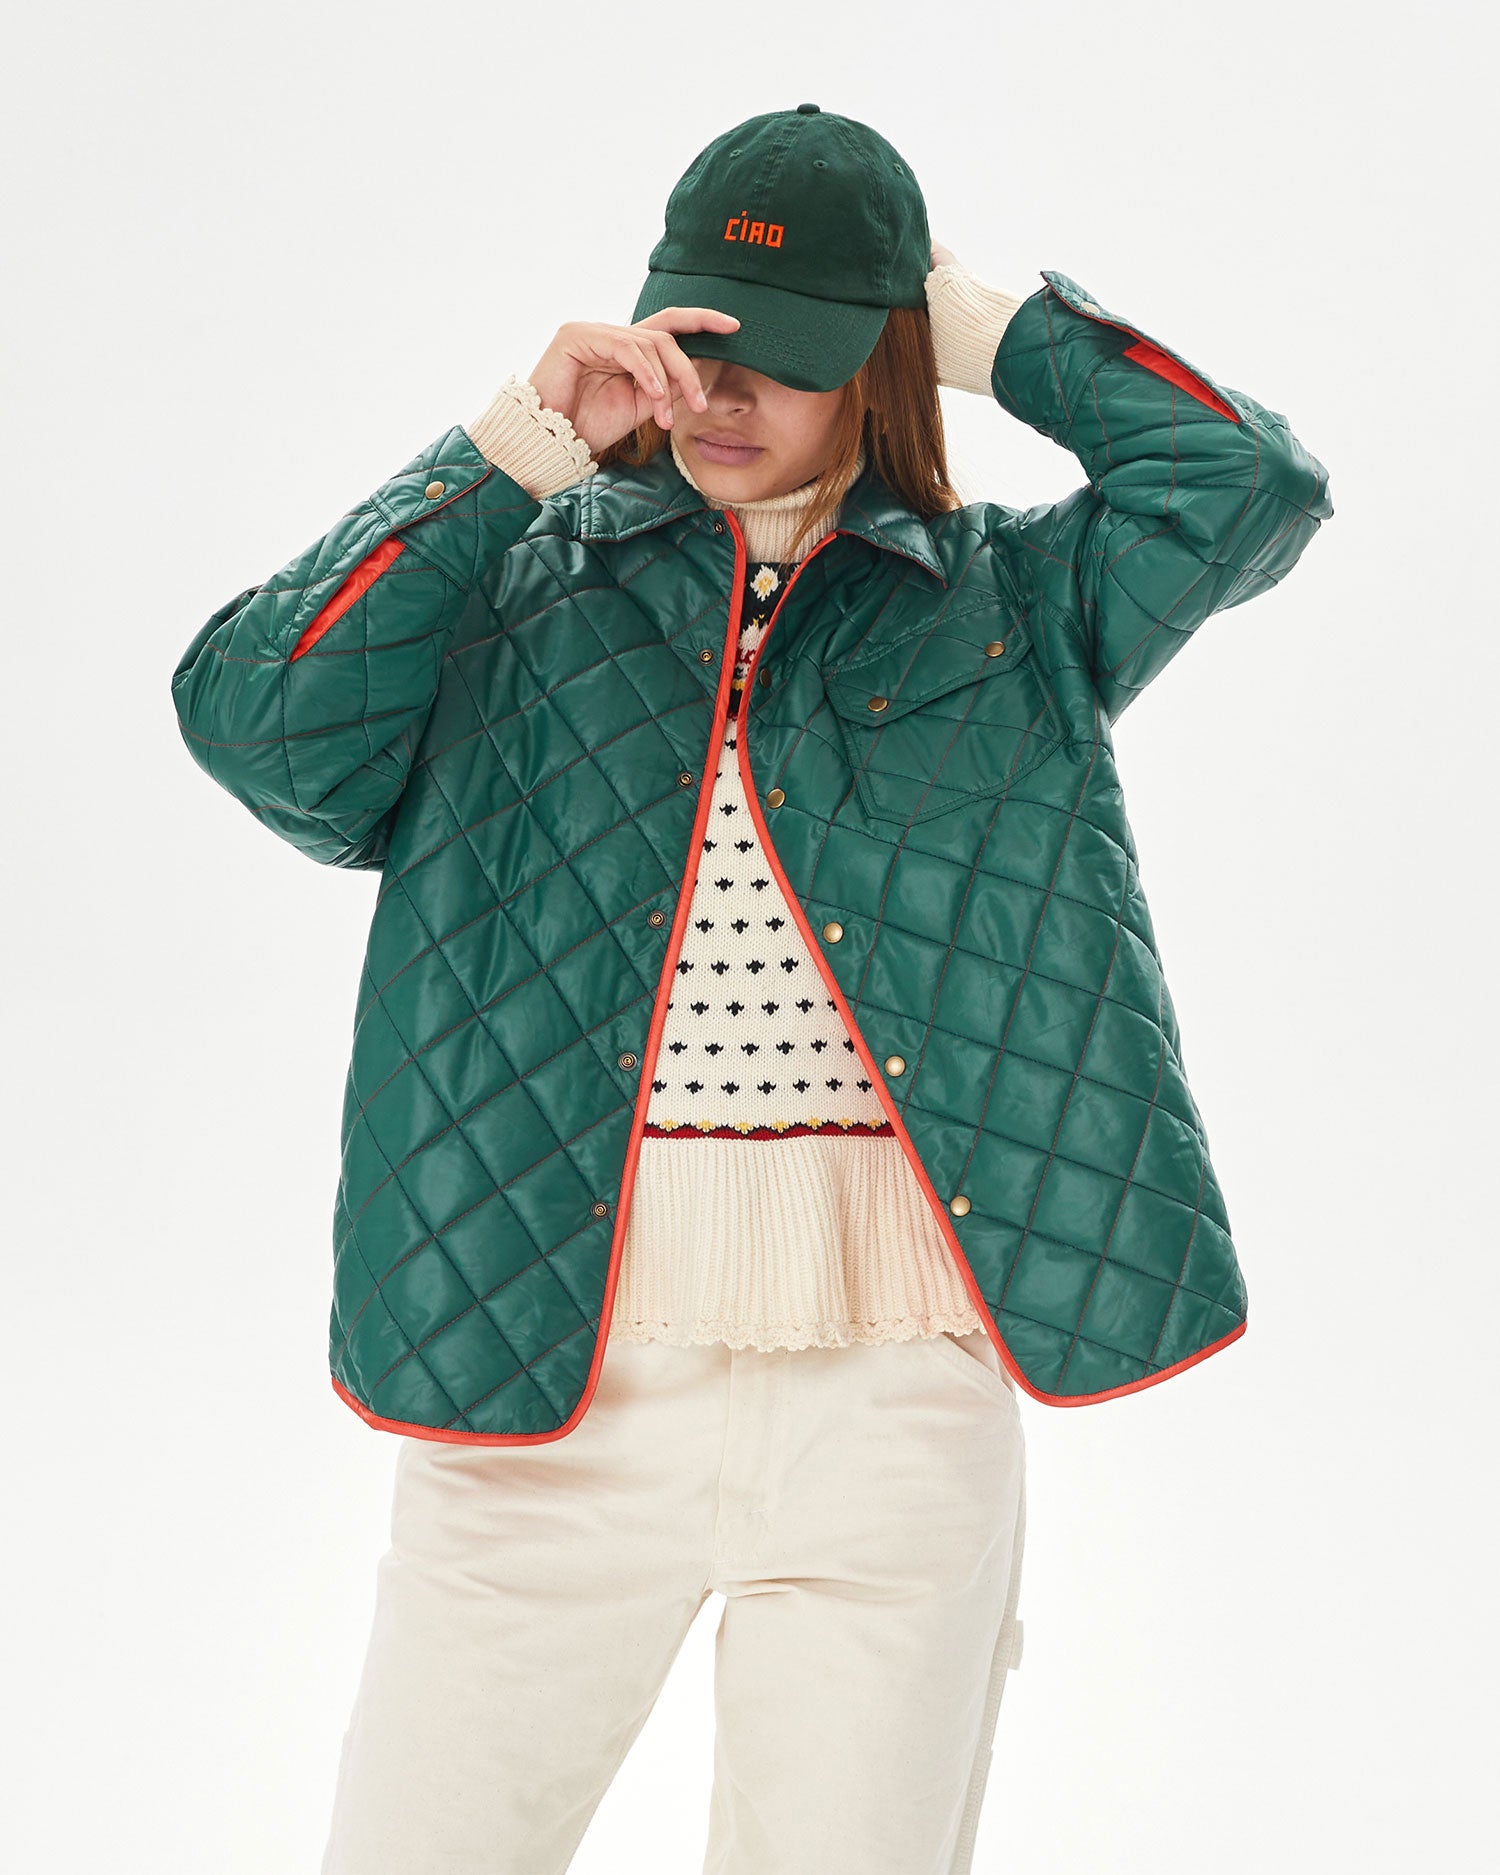 Aurelia putting on the Forest Green Ciao Baseball Hat